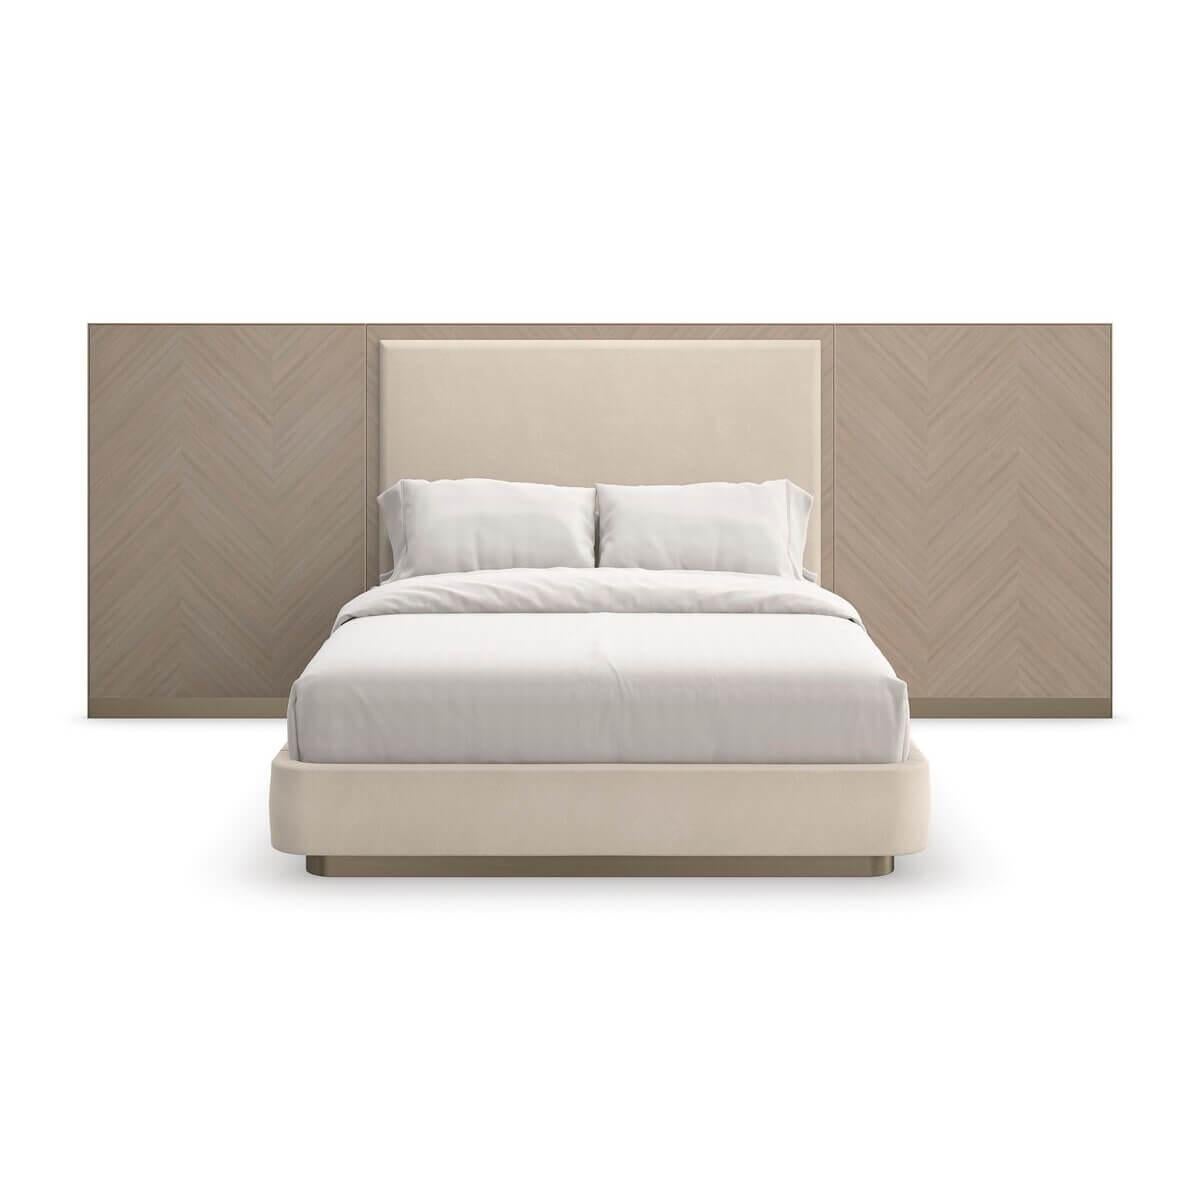 A storied collective of material and form, this classic bed introduces a calming neutral palette that is warm and inviting.

Features paneled wings framed in Koto veneers with a subtle Chevron pattern inspired by early Greek motifs, its